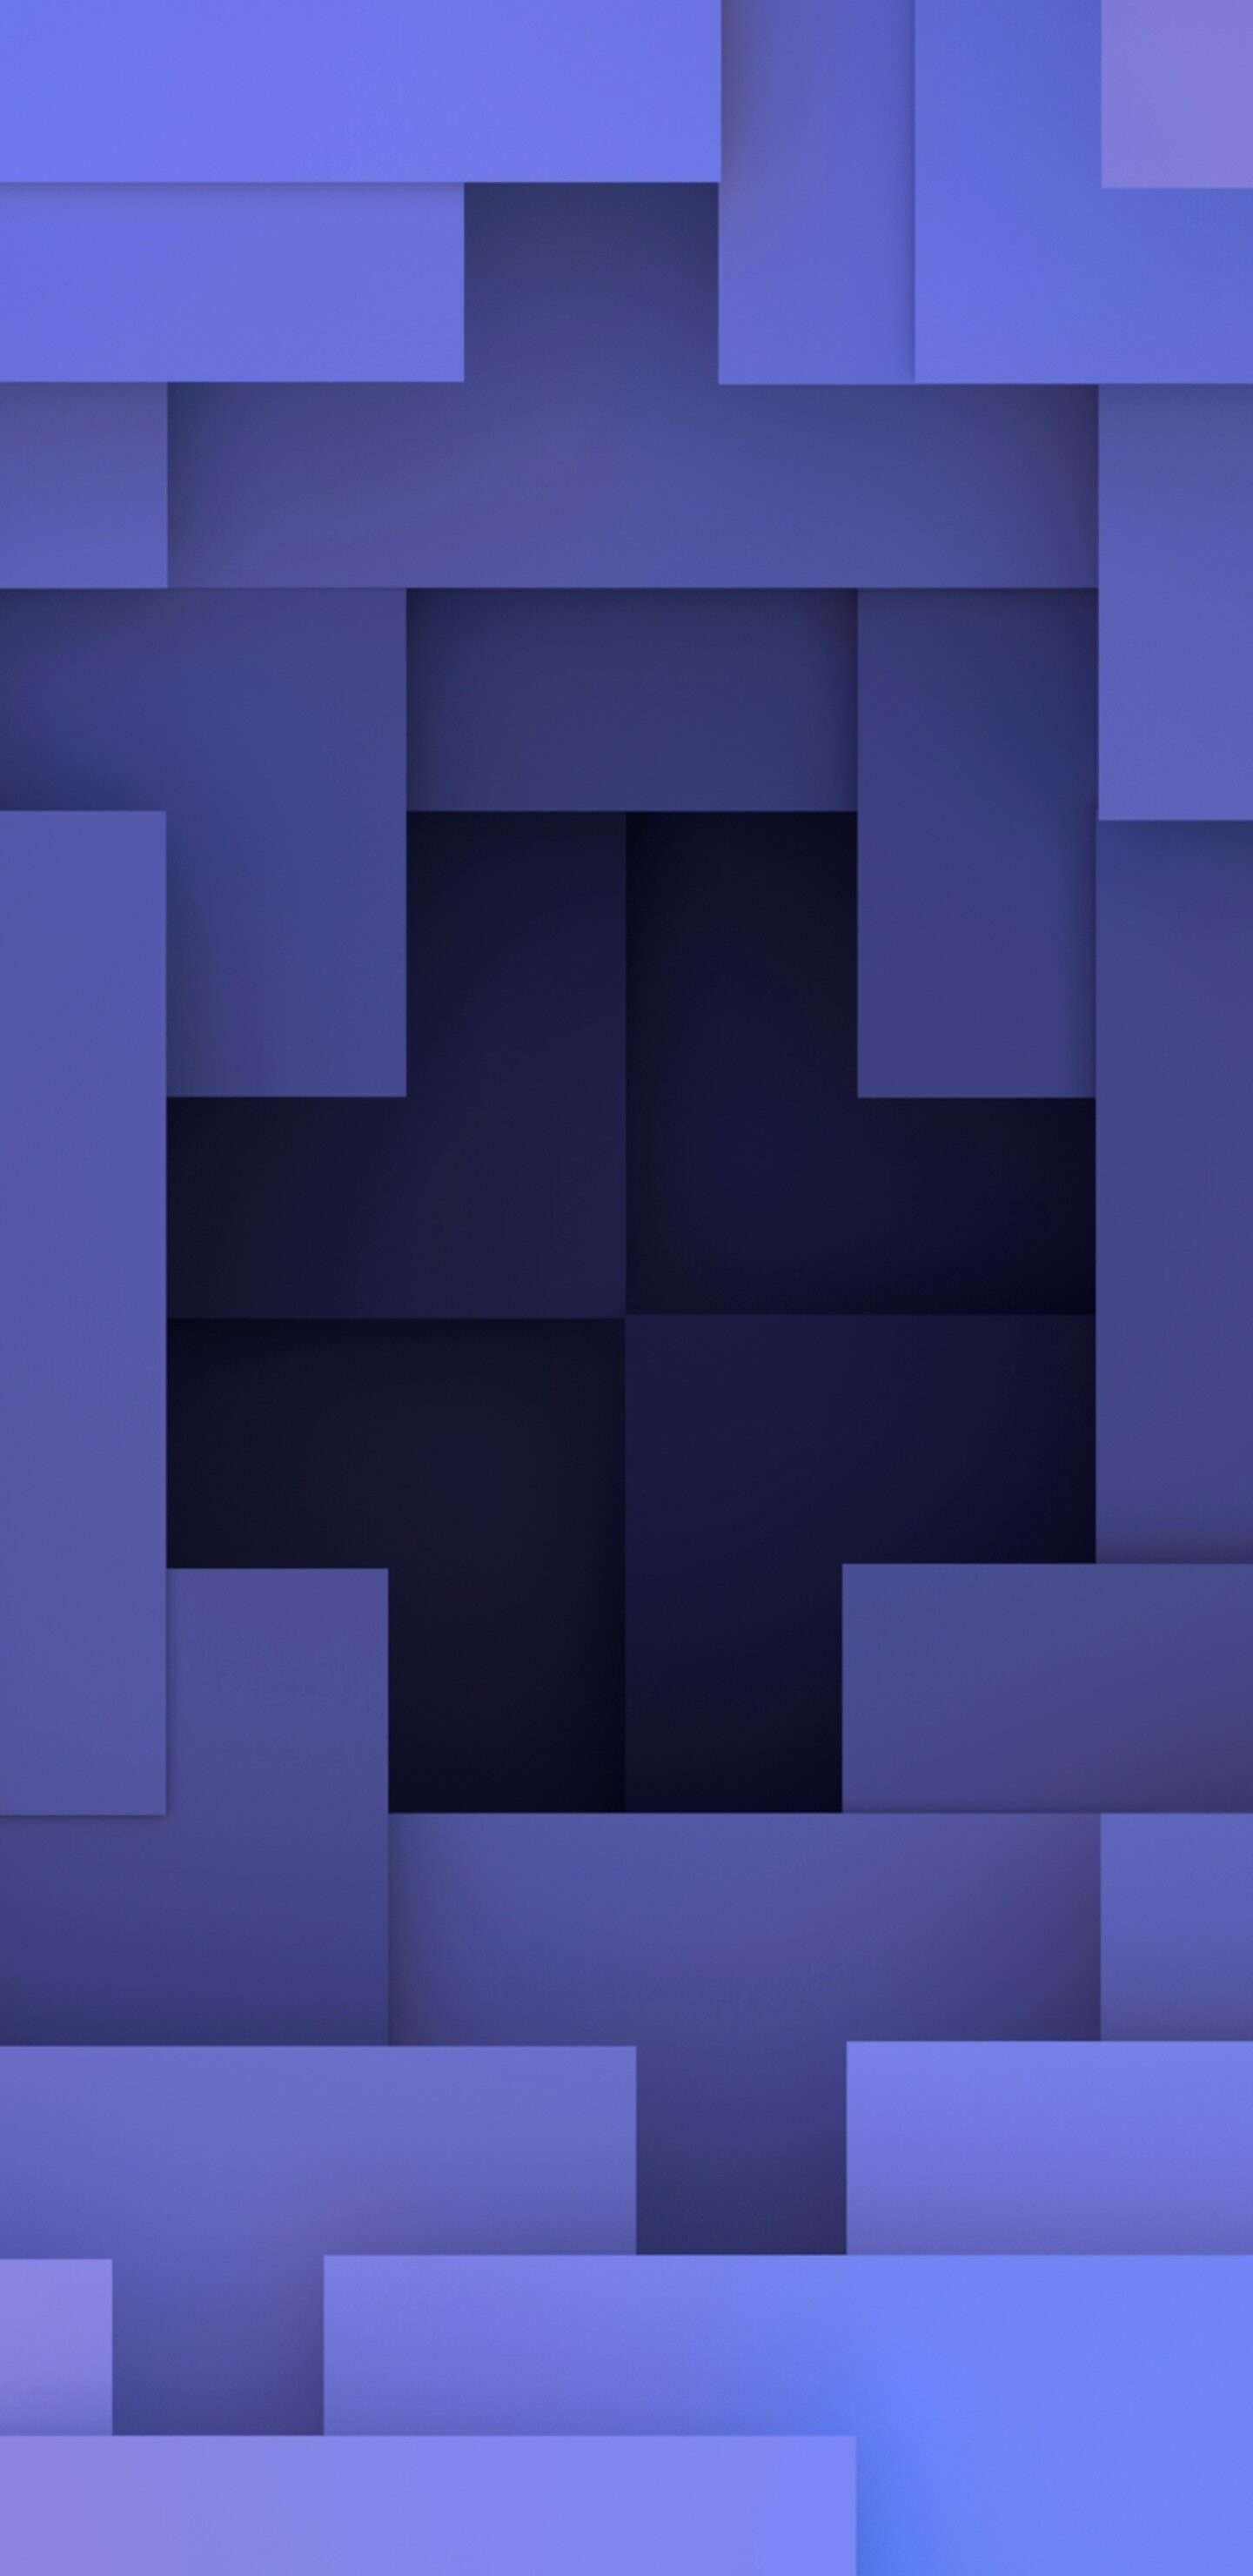 Geometric Abstract: Gradient, Rectangles, Identical shape, Figures. 1440x2960 HD Background.